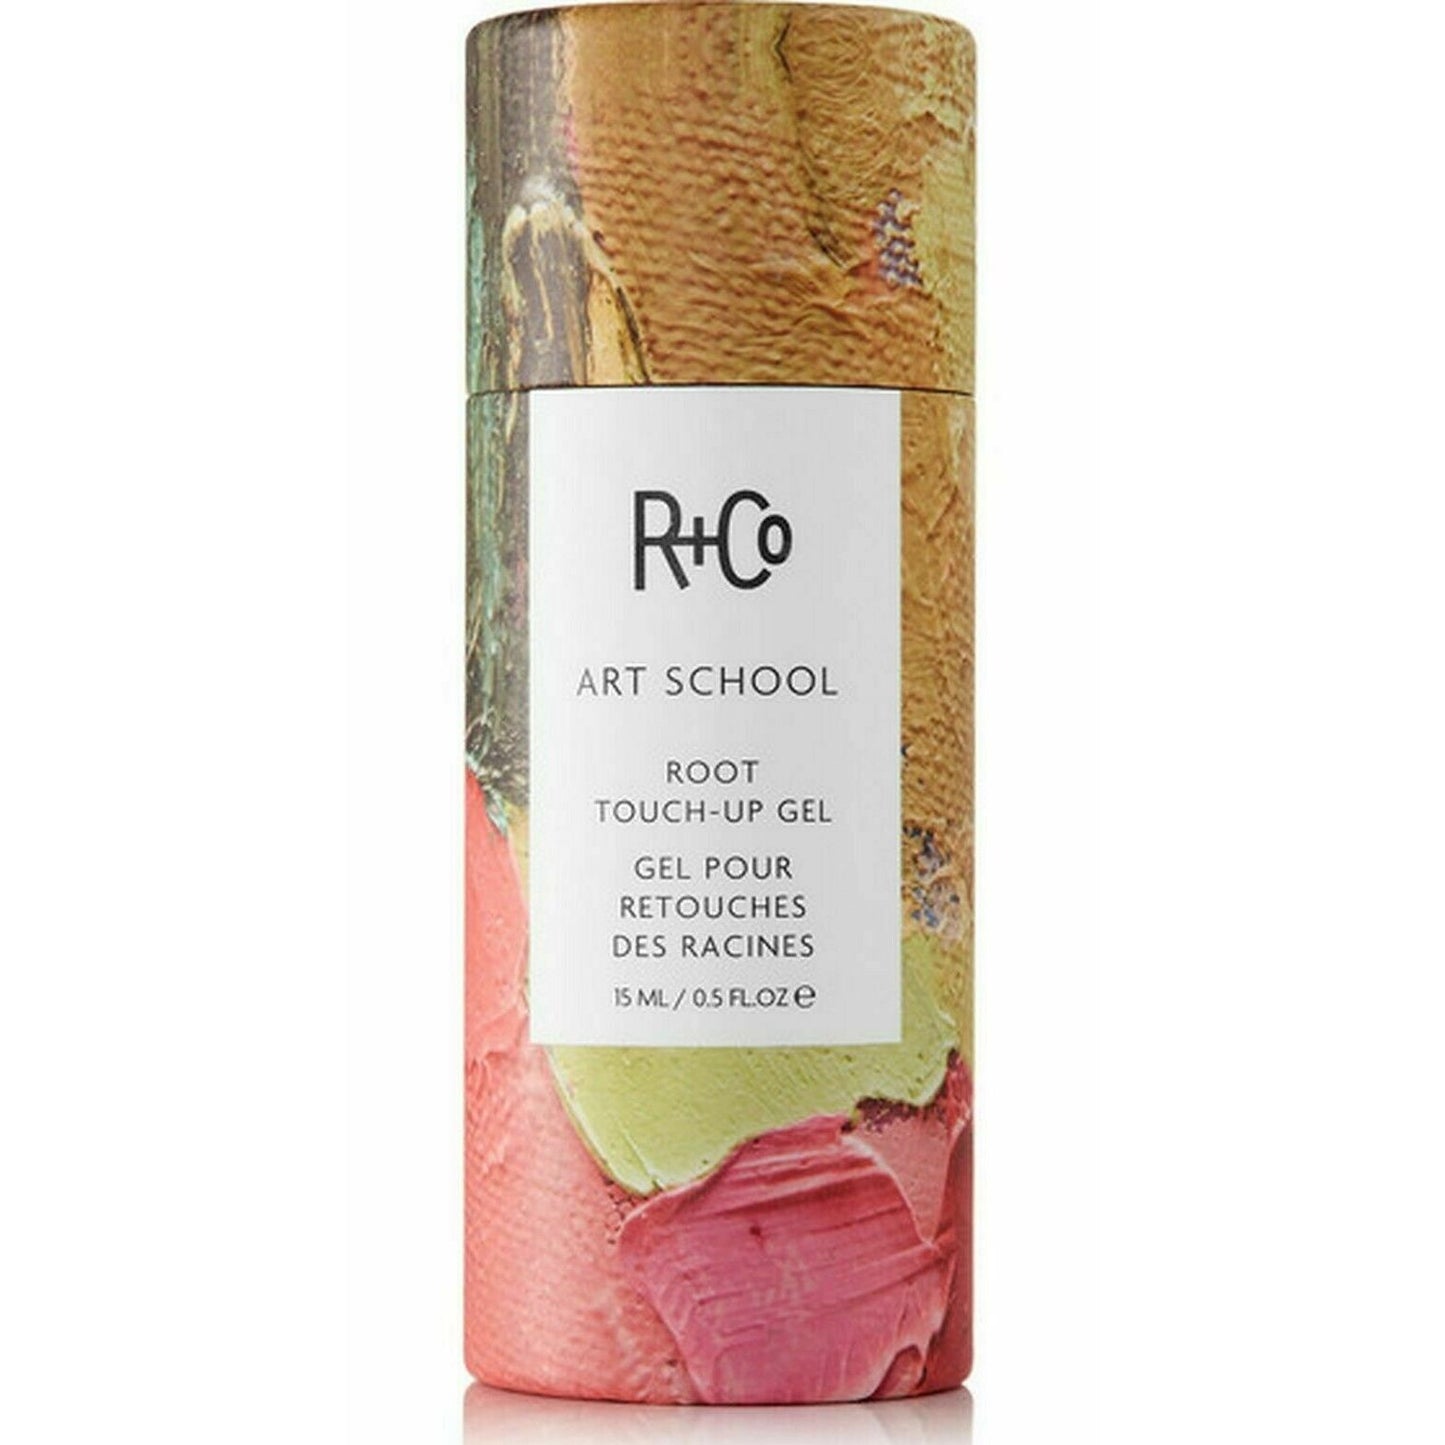 R+Co Art School Root Touch Up Gel Brown